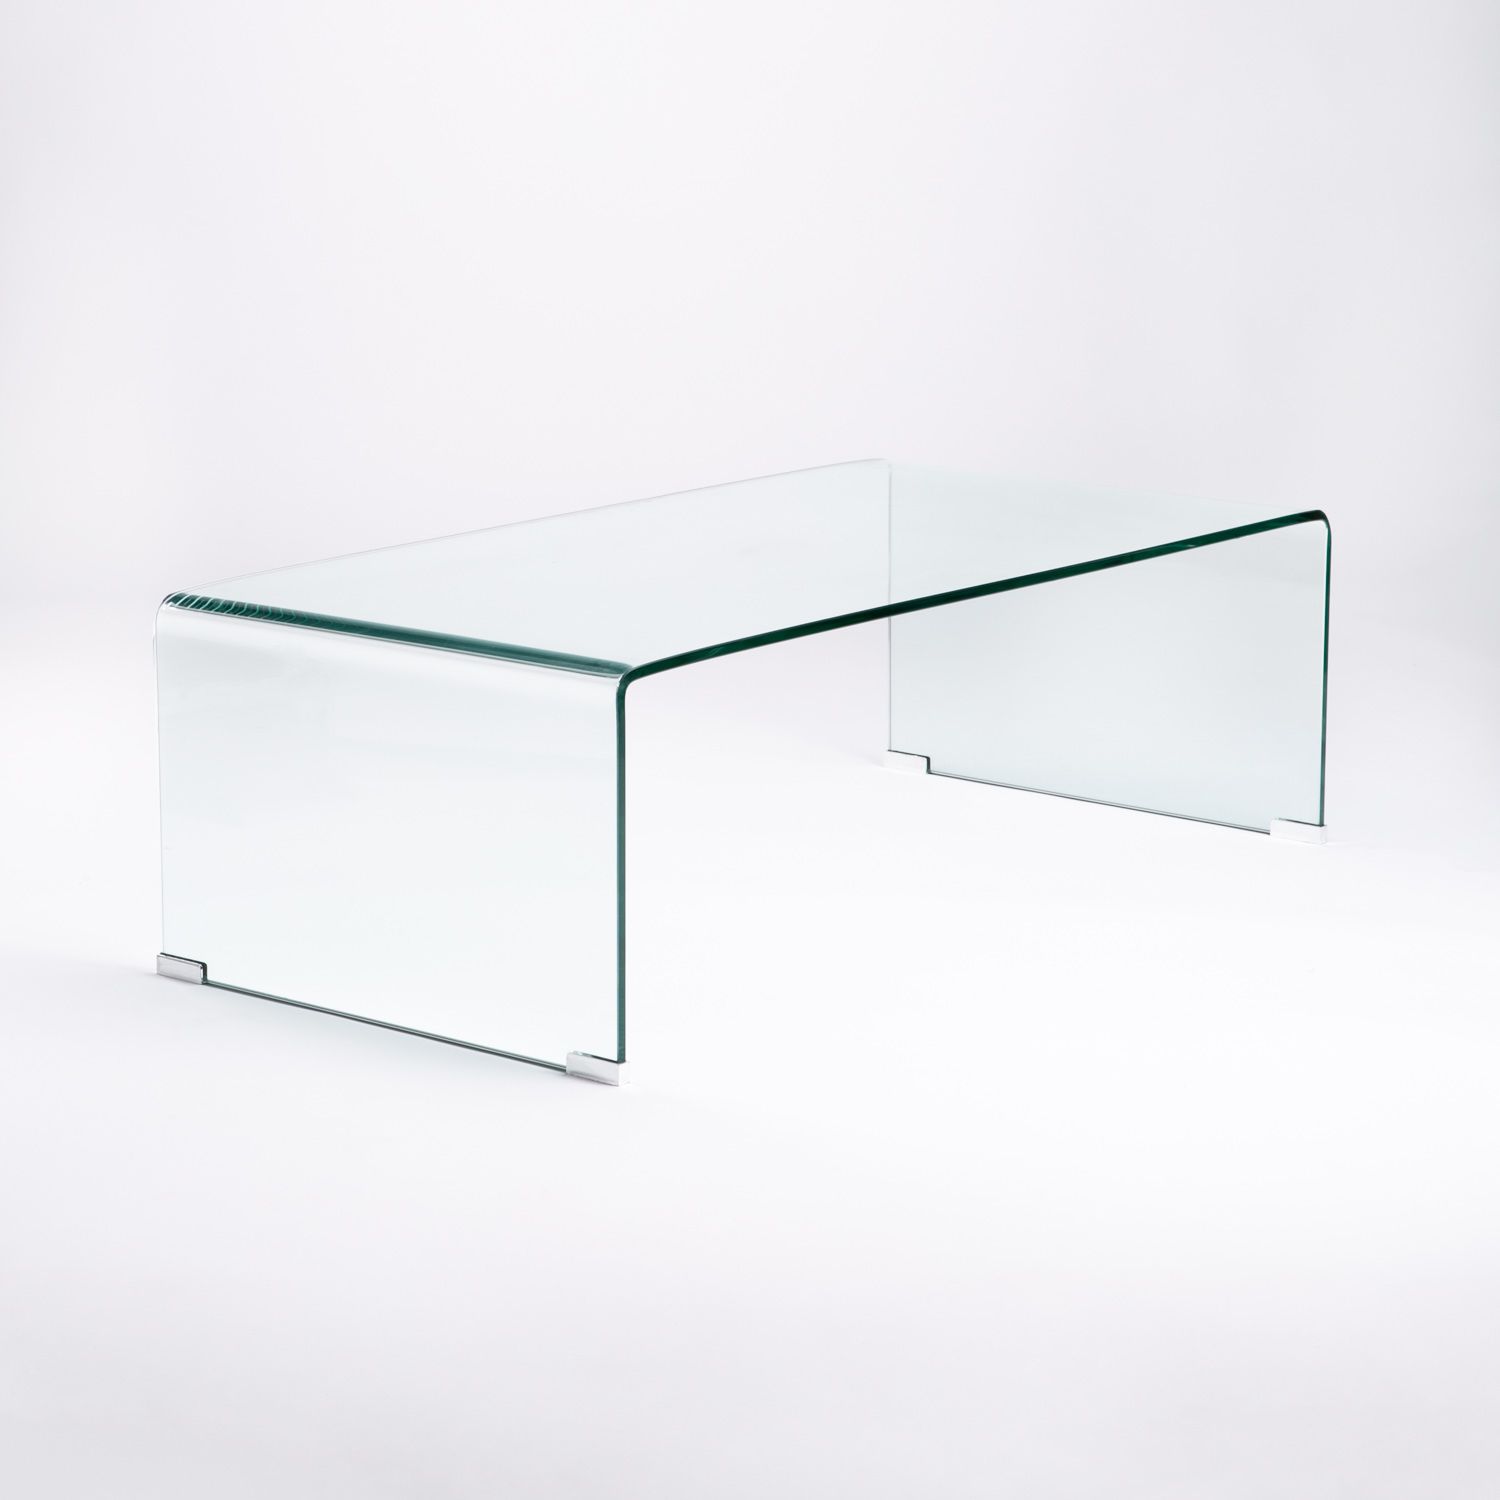 Ruby 110x55cm 12mm Tempered Glass Coffee Table | Decofurn Furniture Intended For Tempered Glass Coffee Tables (View 13 of 15)